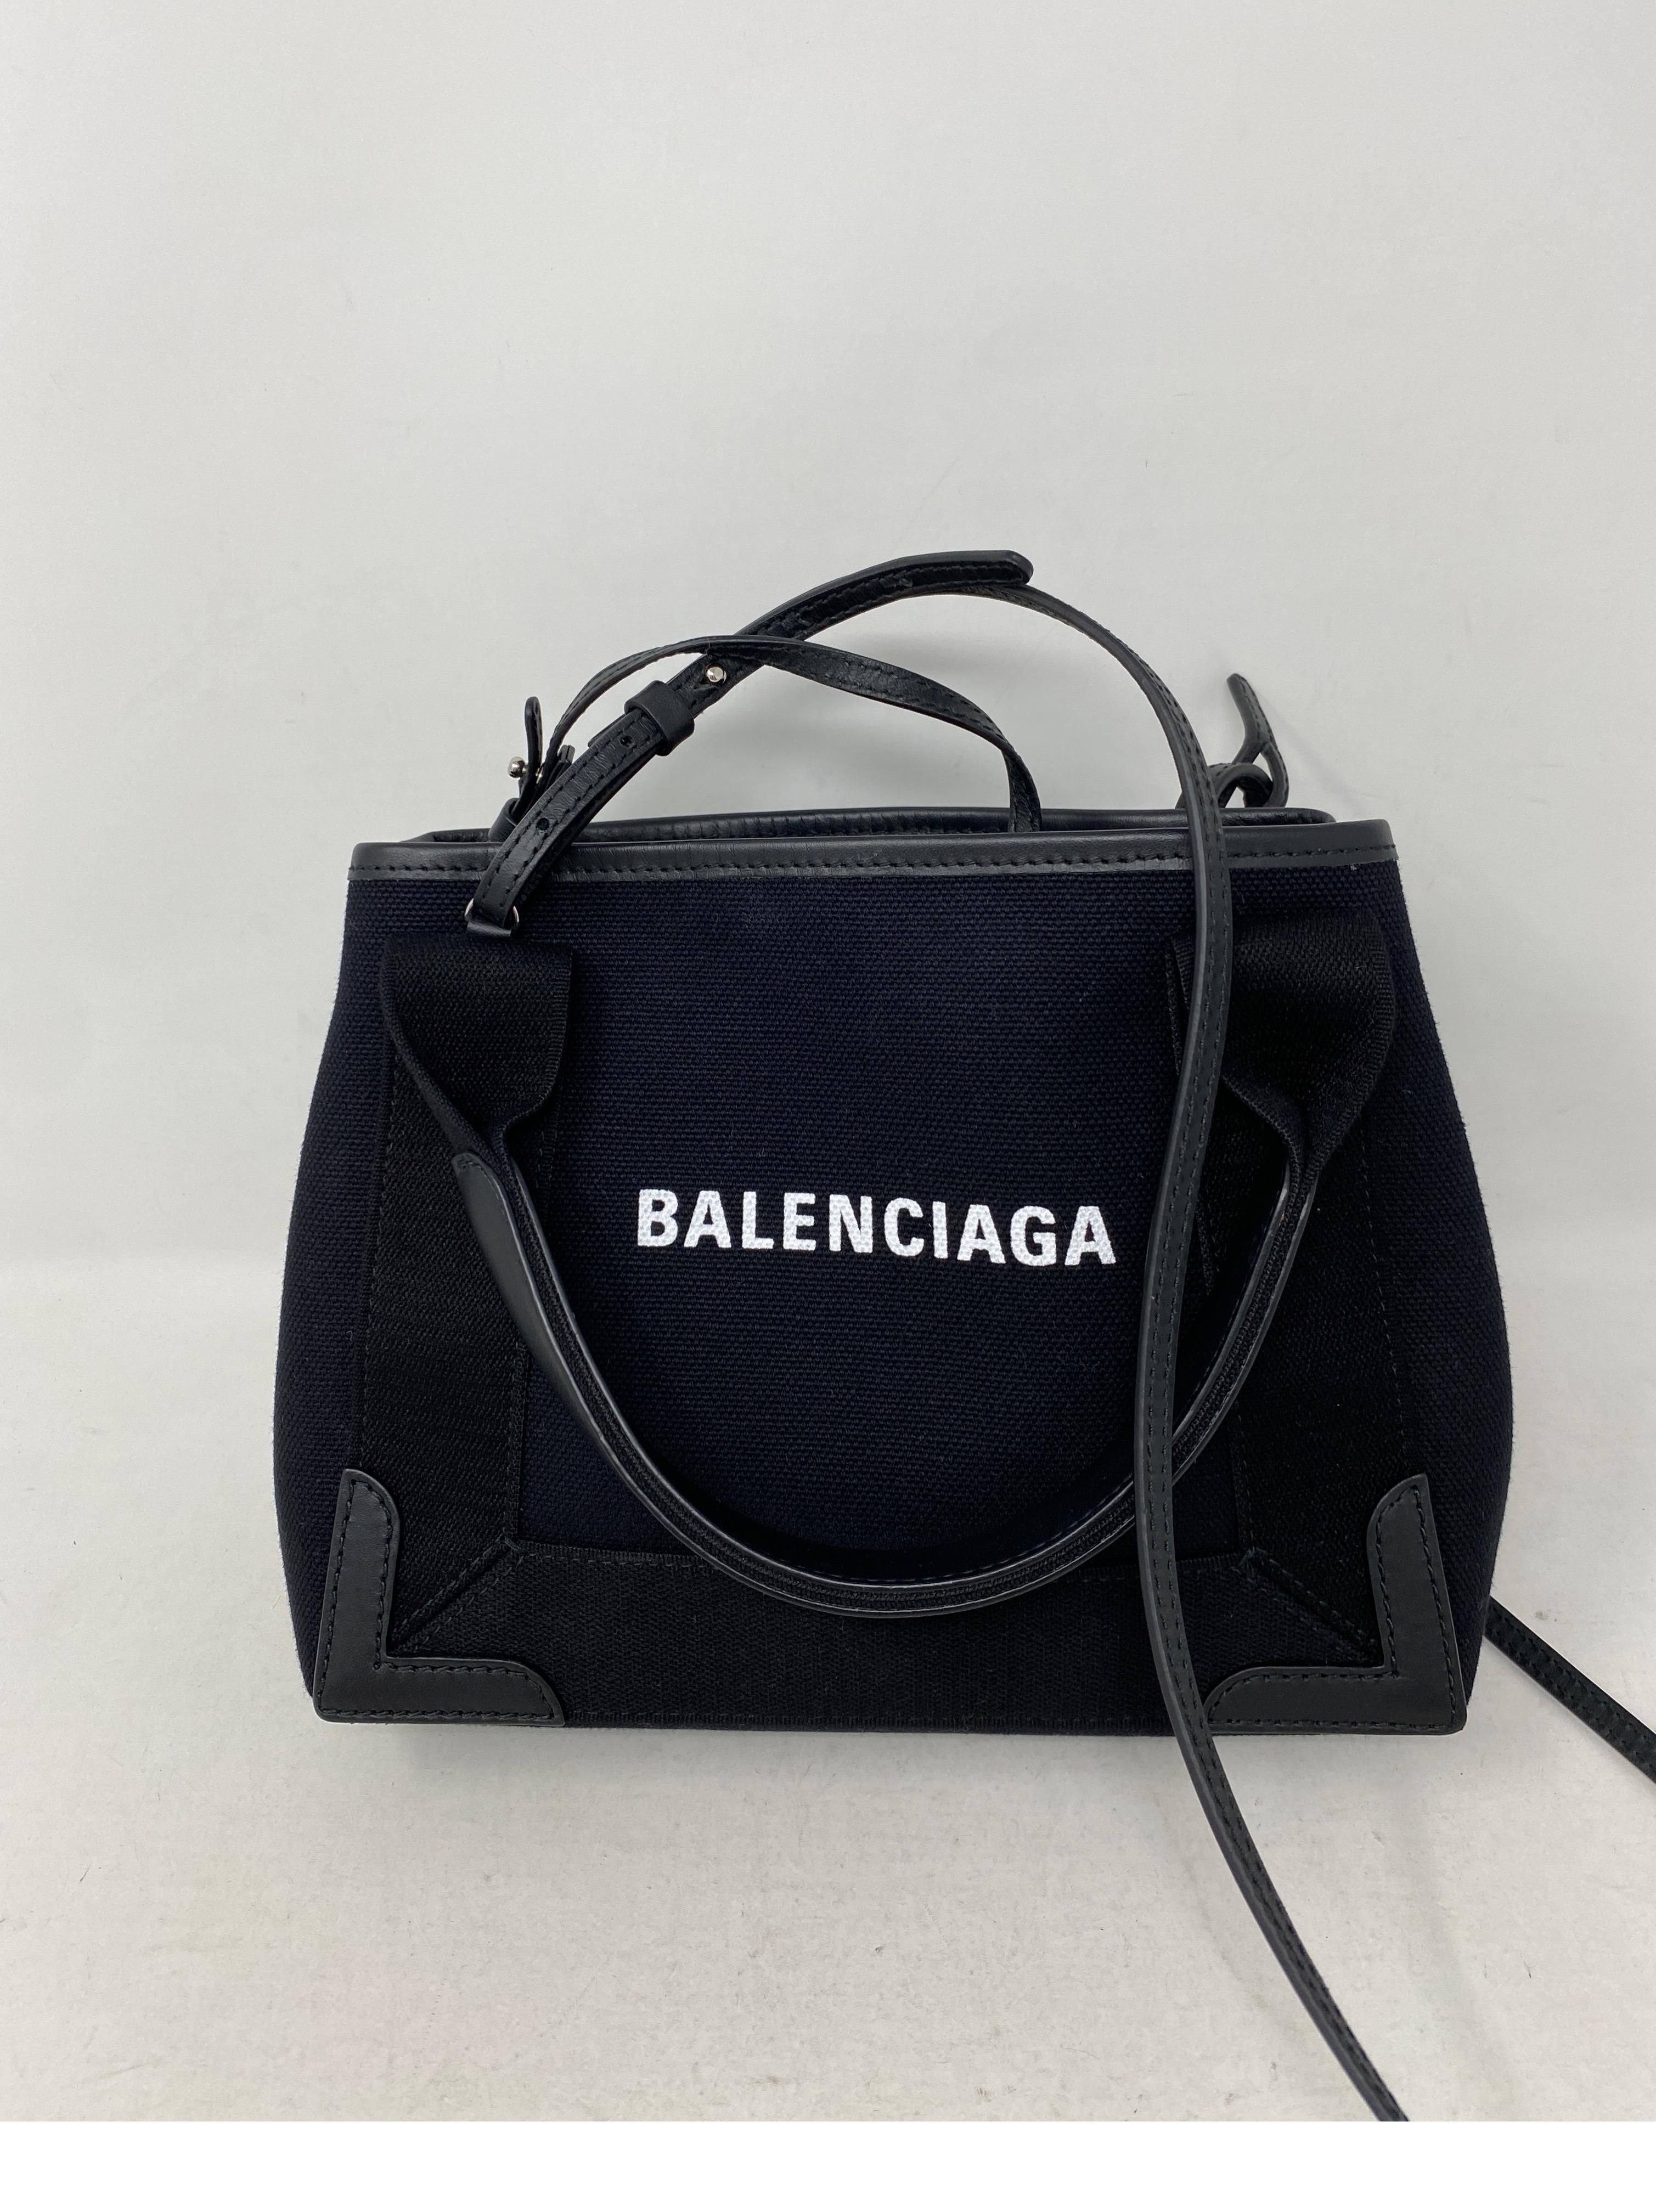 Balenciaga Black Canvas Cotton Bag. Can be worn as a crossbody too. Cute small size bag. Mint like brand new condition. Includes pouch inside. Guaranteed authentic. 